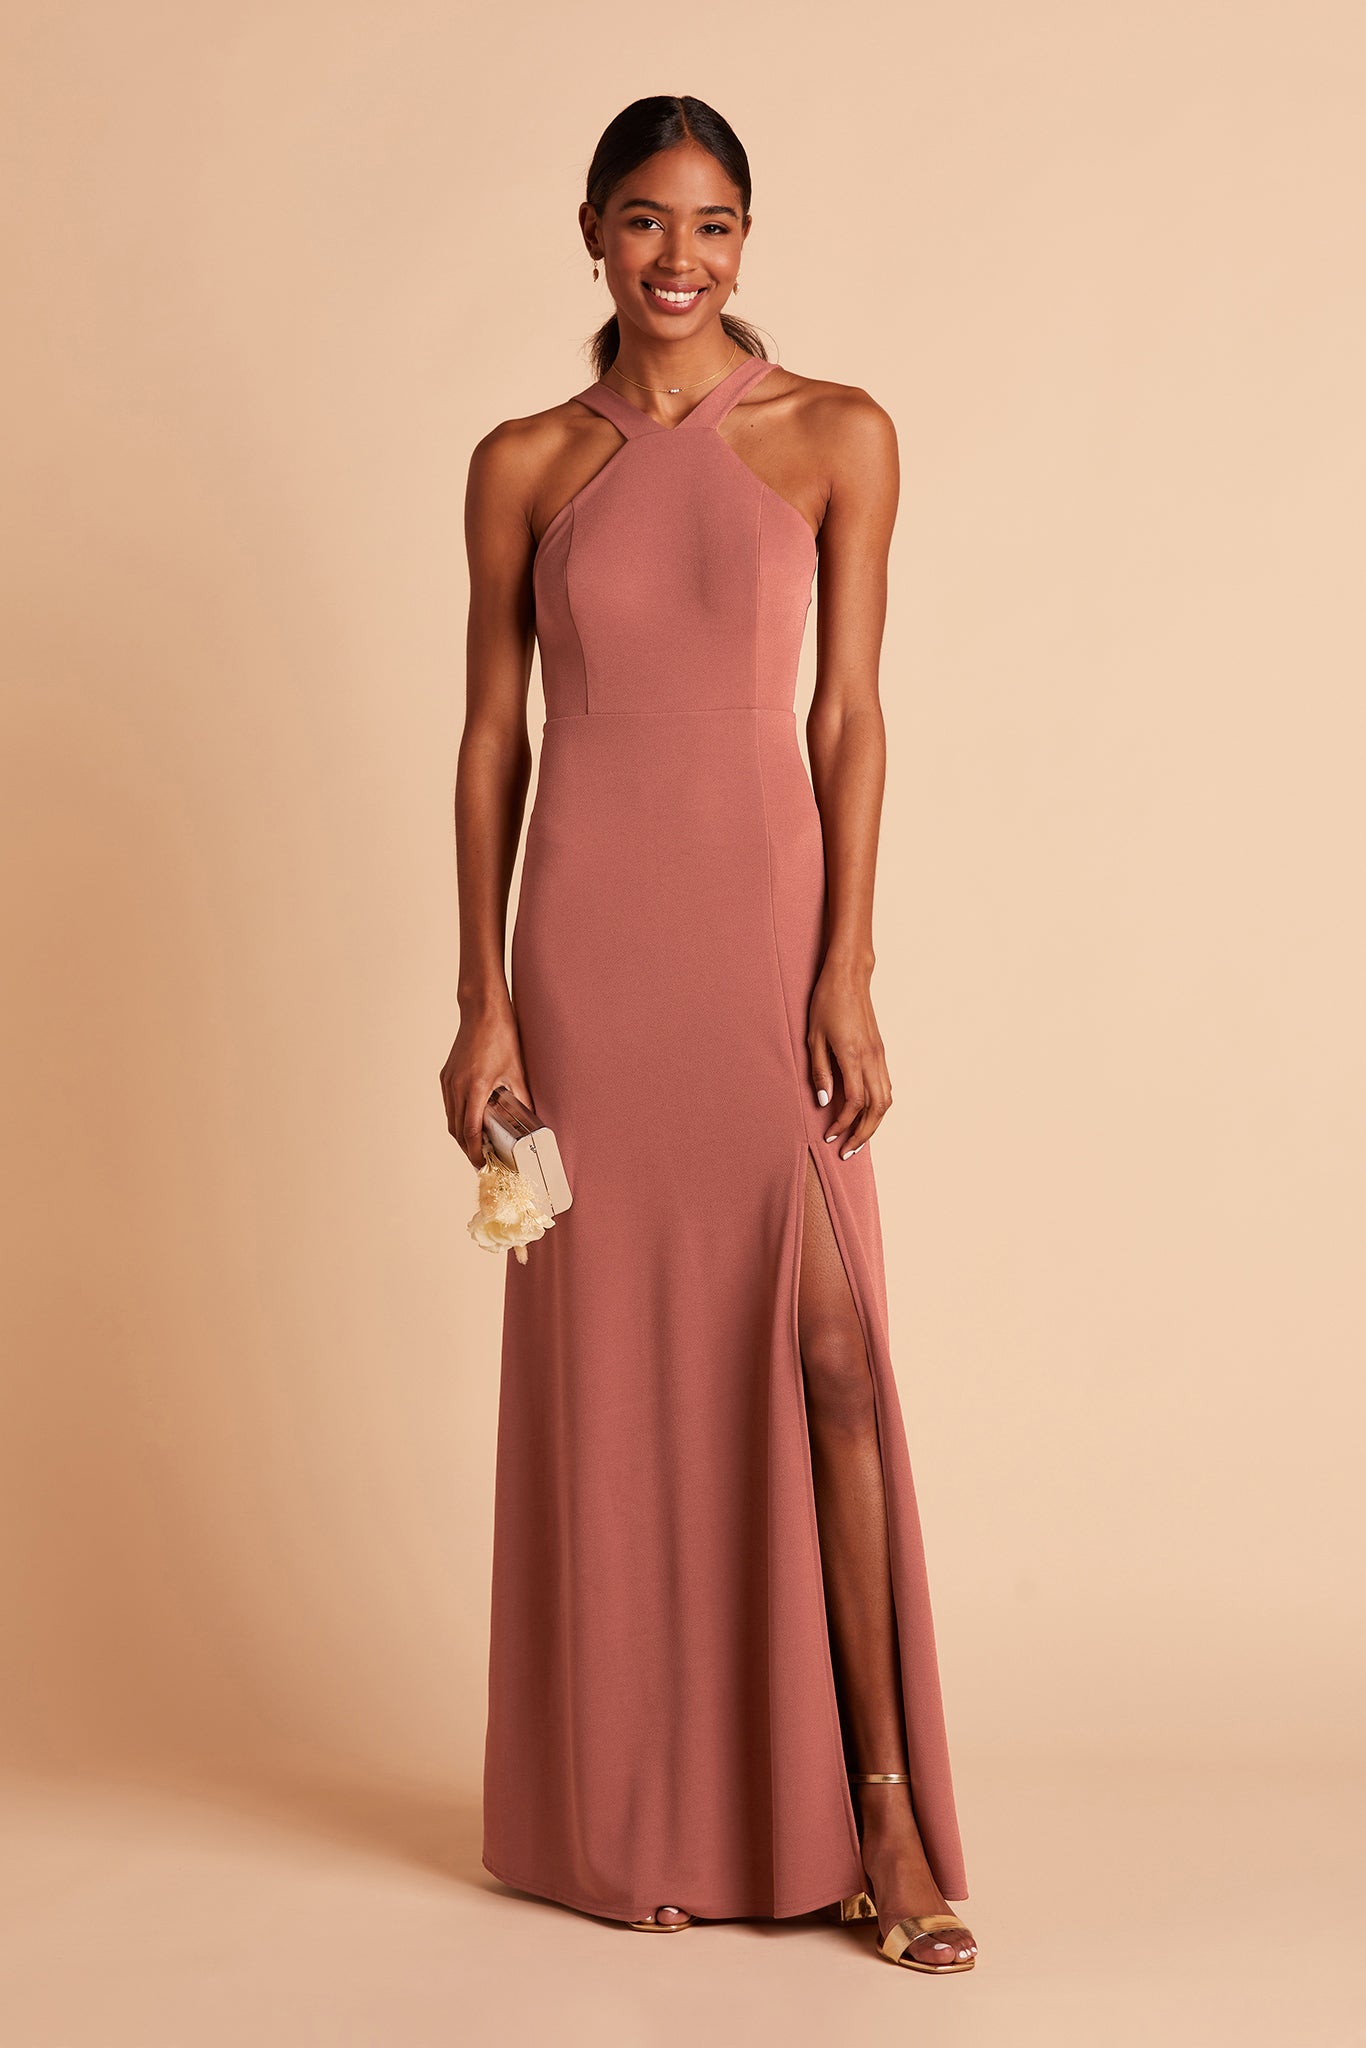 Gene bridesmaid dress with slit in desert rose crepe by Birdy Grey, front view